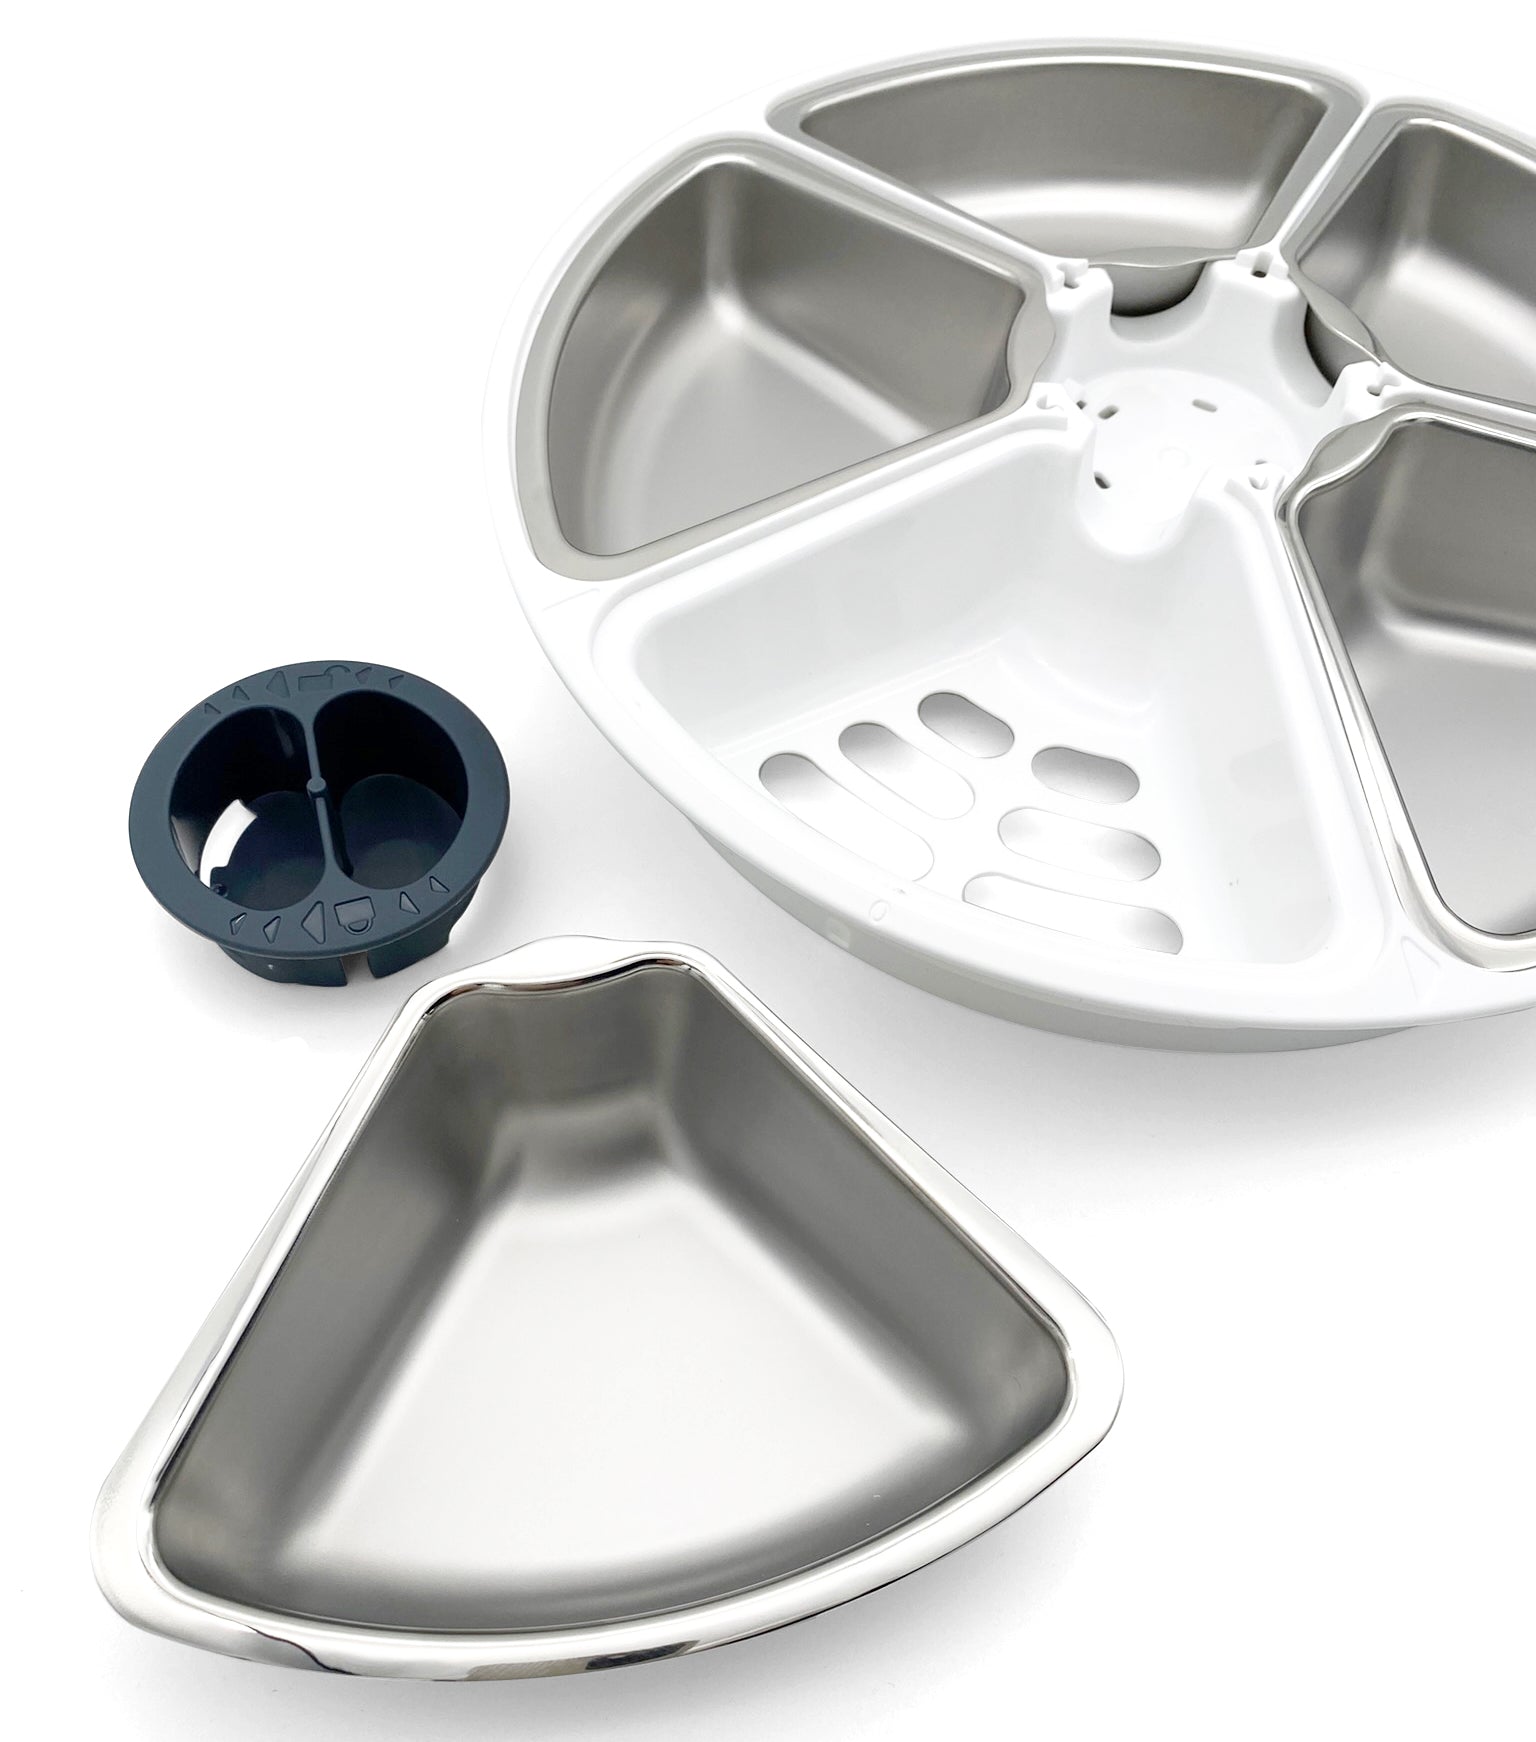 Stainless Steel Bowl Inserts x 5 for C500 (Model 365) Five-meal Automatic Pet Feeders